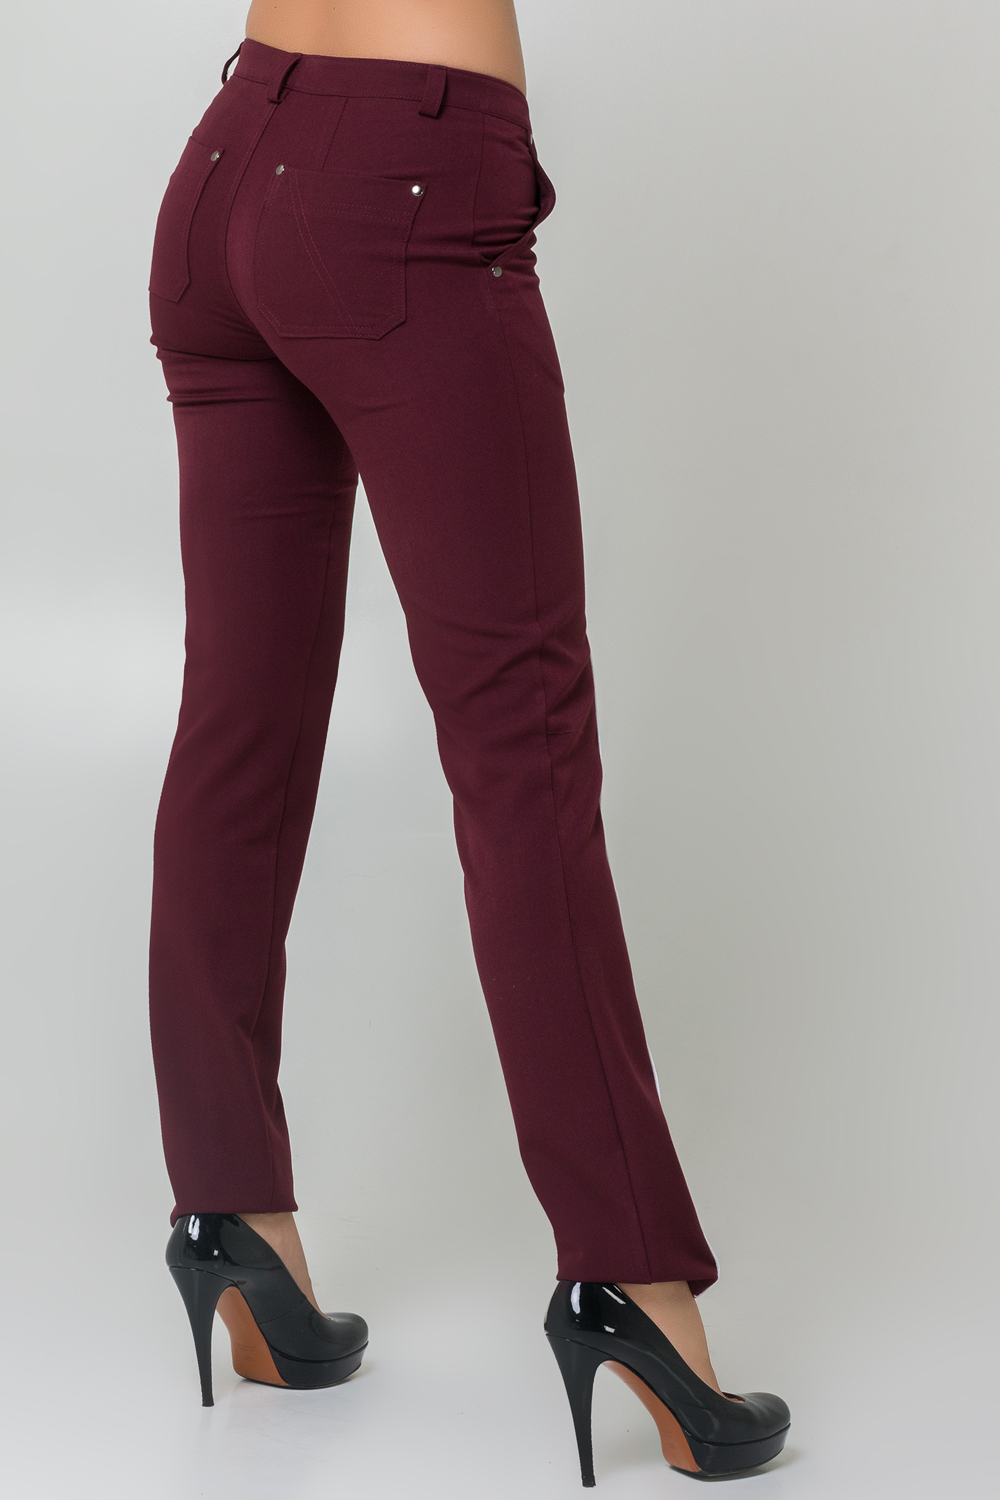 Trousers with stripes in burgundy